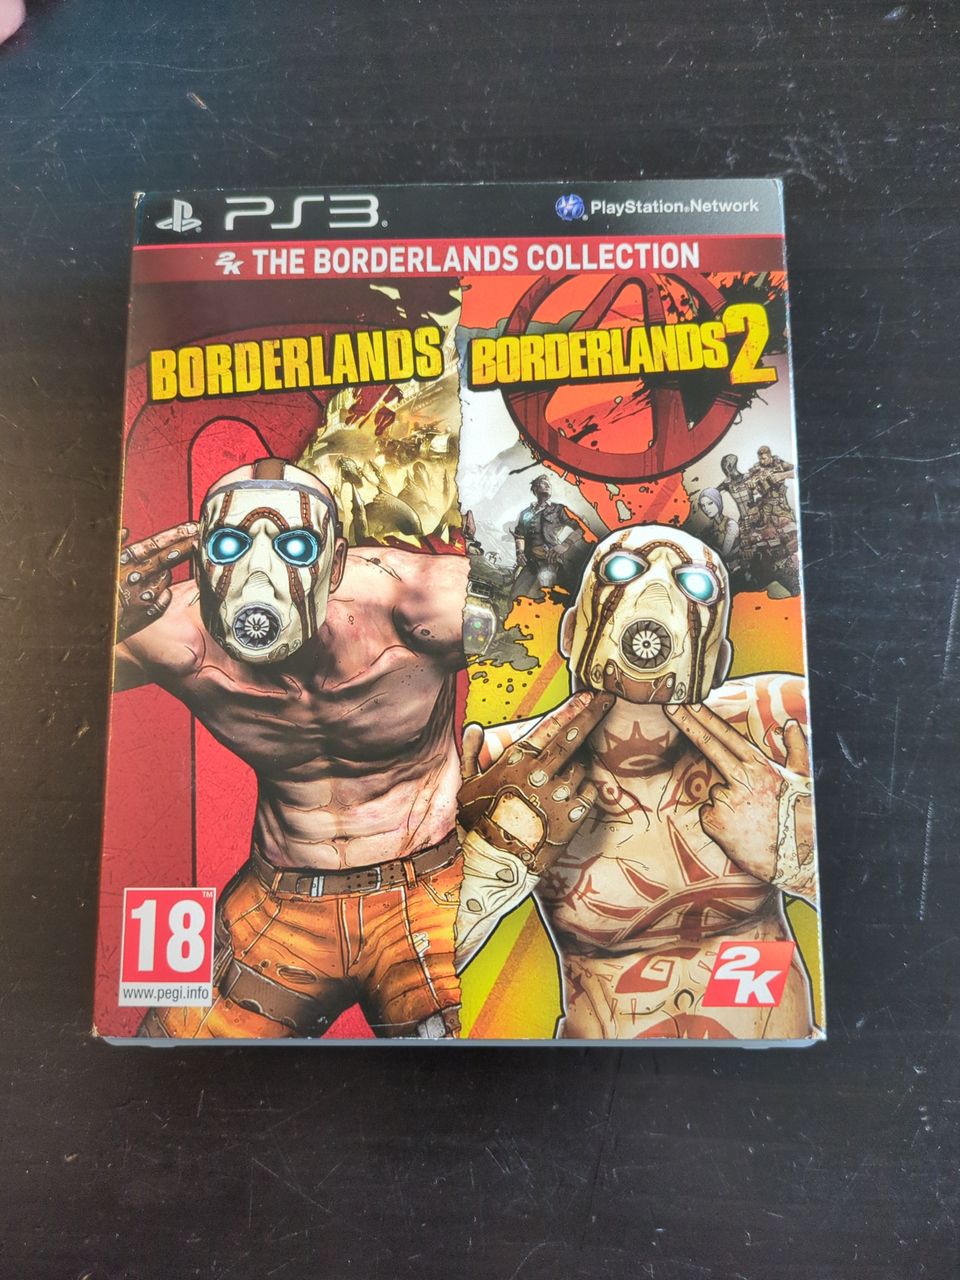 The Borderlands collection